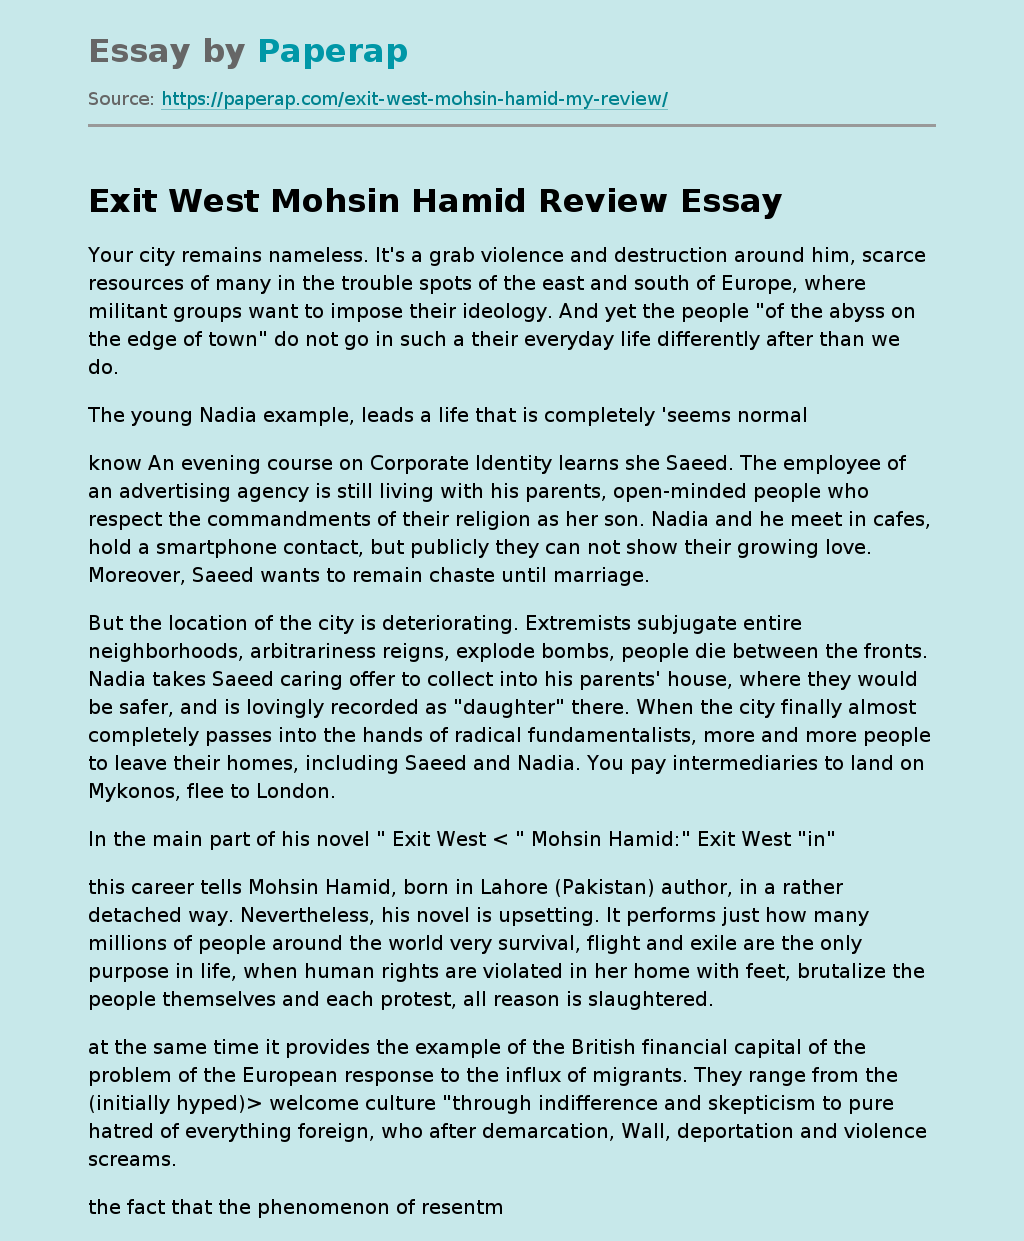 Exit West Mohsin Hamid Review